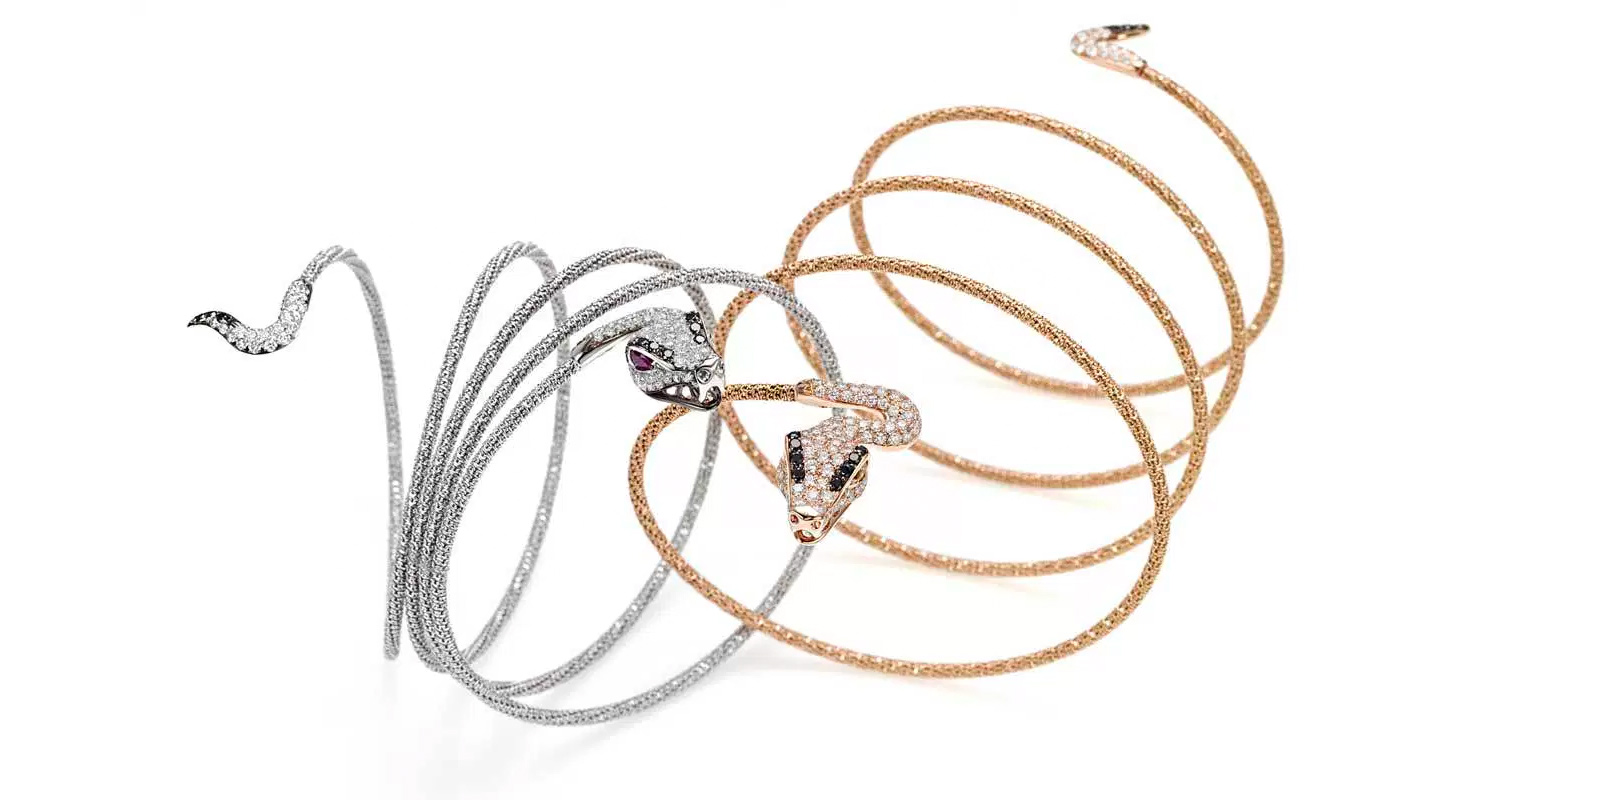 Giovanni Ferraris Snake bracelets in white and rose gold with diamonds